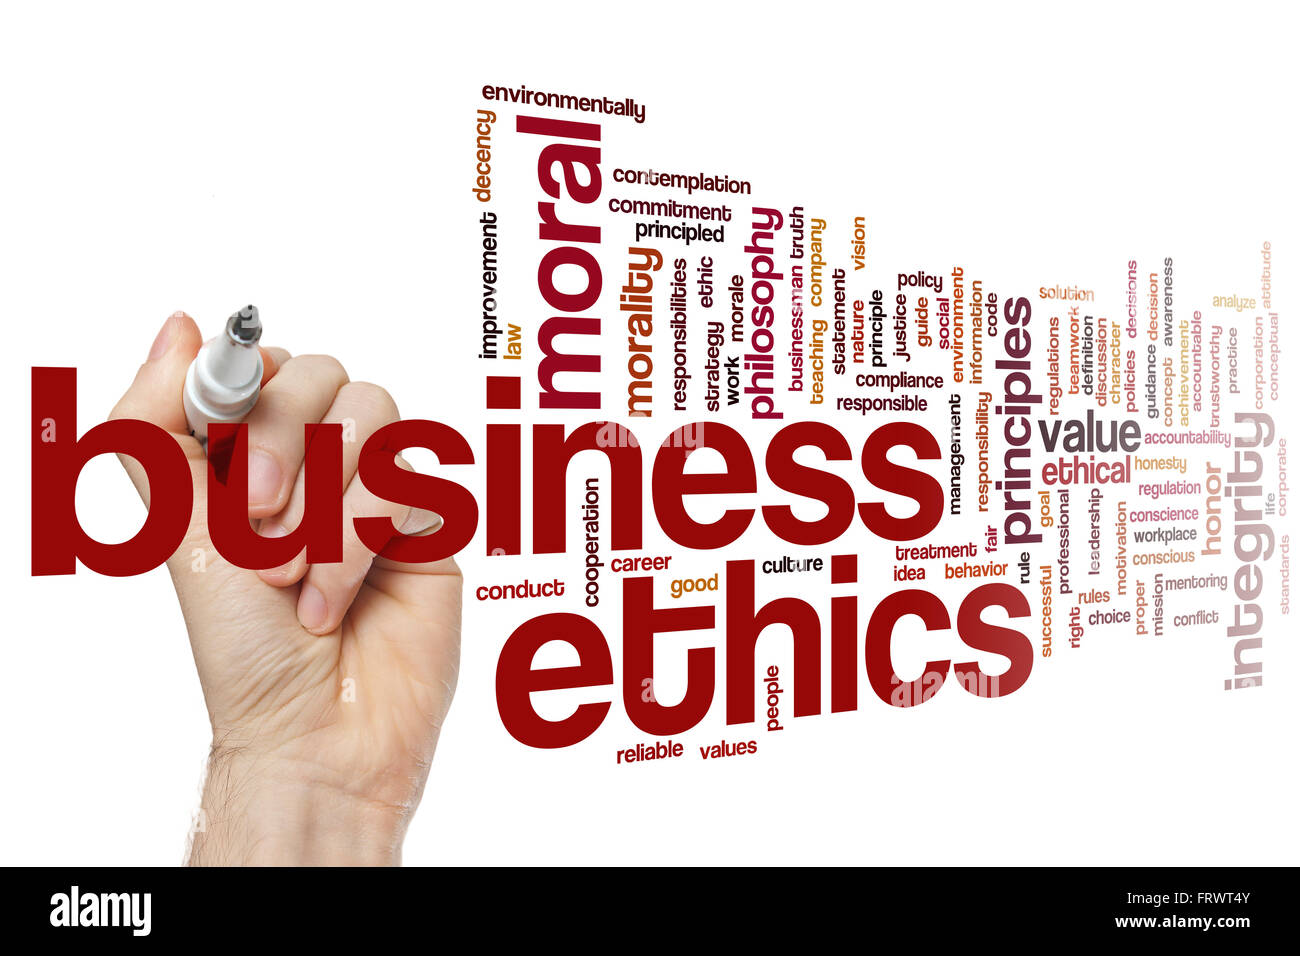 Business ethics concept word cloud background Stock Photo